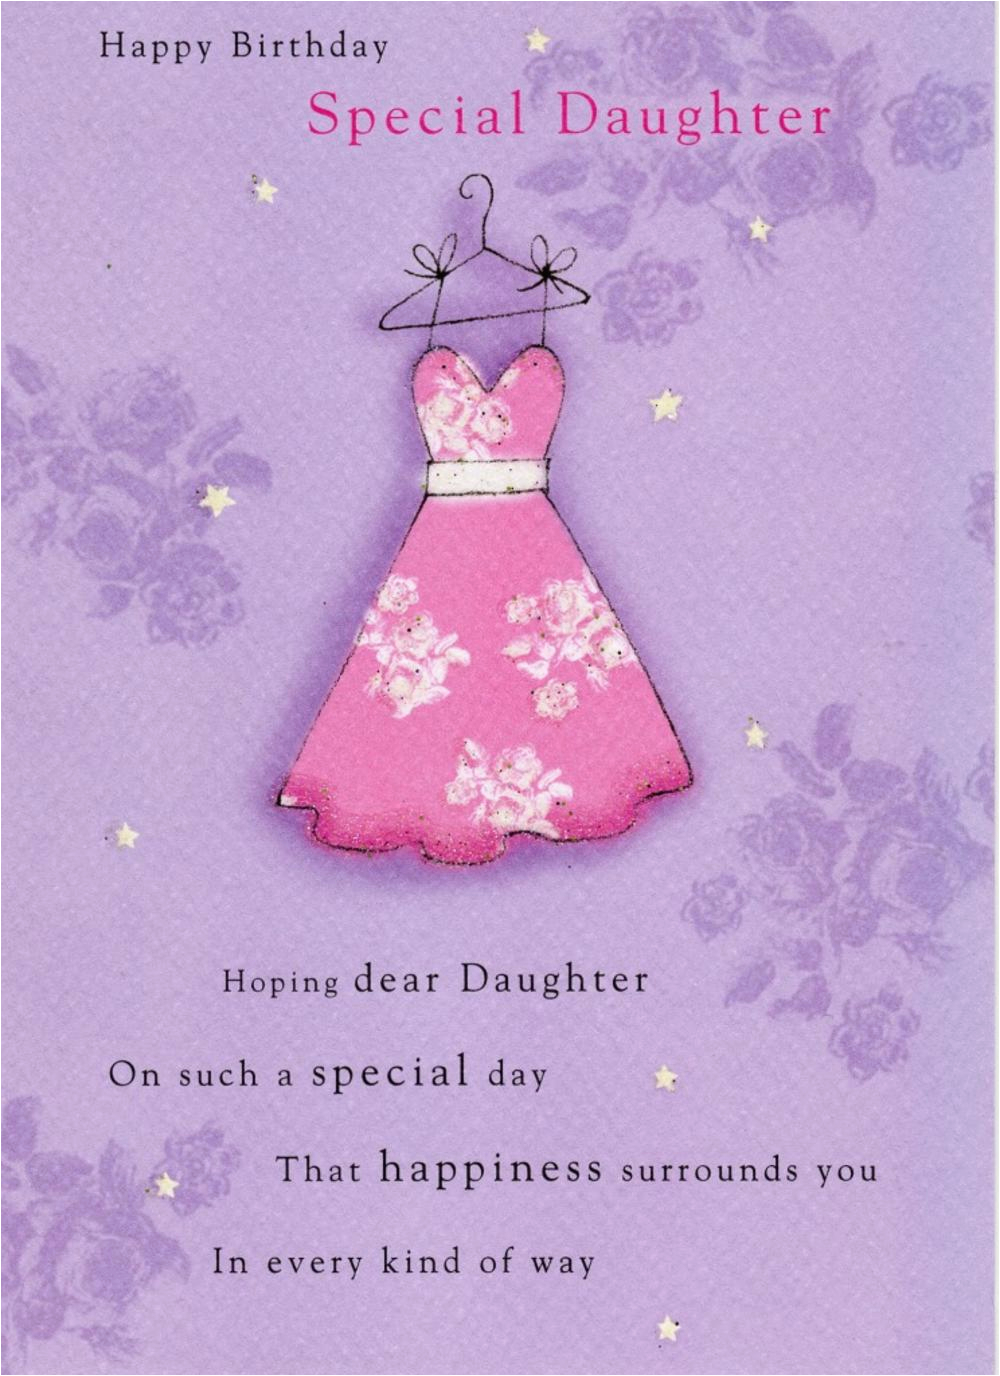 kcsnjwr027 special daughter birthday greeting card second nature cards flittered glitter